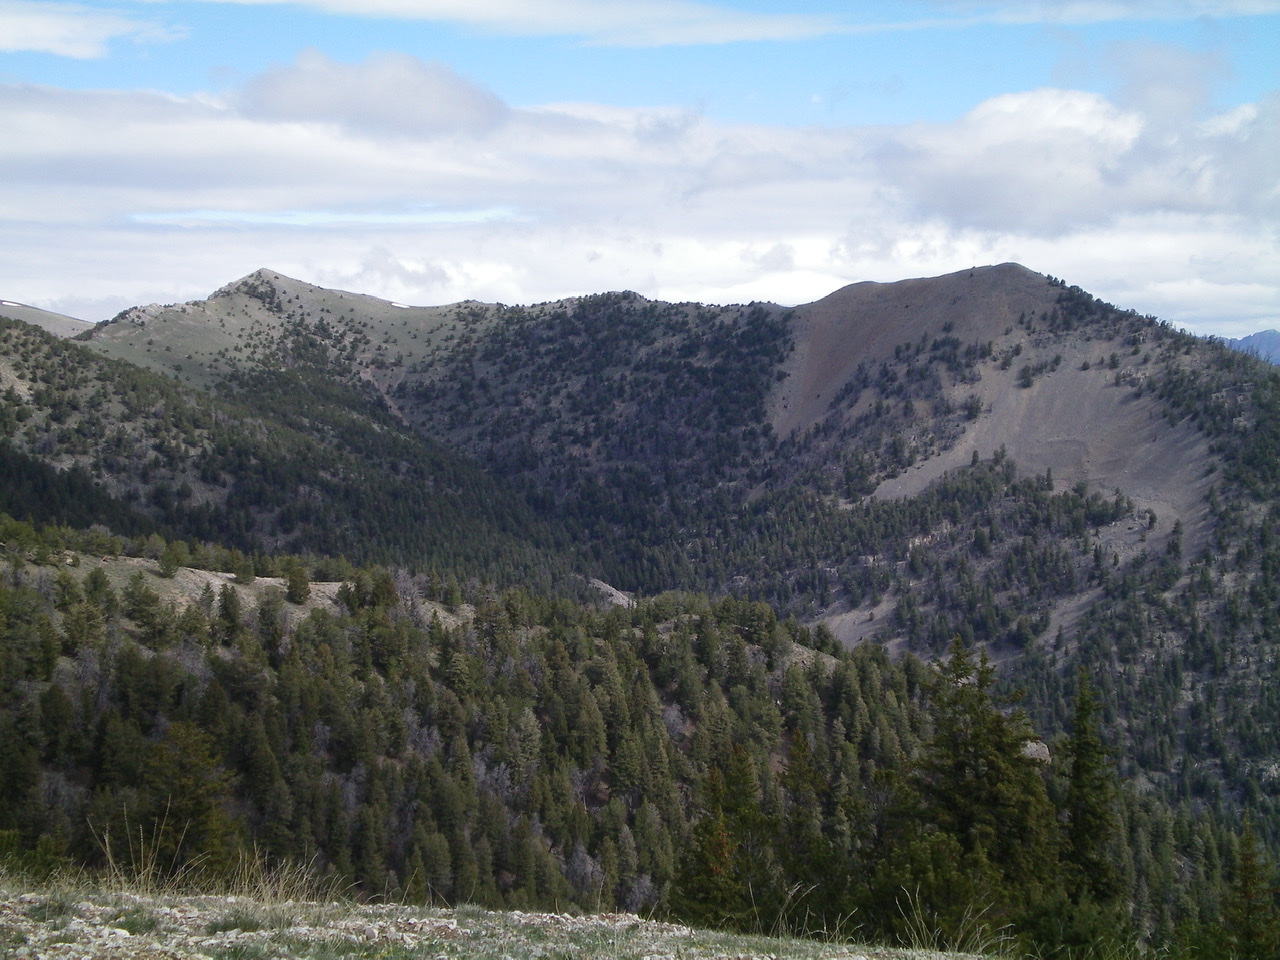 Gallagher Peak (right) and Peak 9877 (left) and the tedious connecting ridge between them. Livingston Douglas Photo 